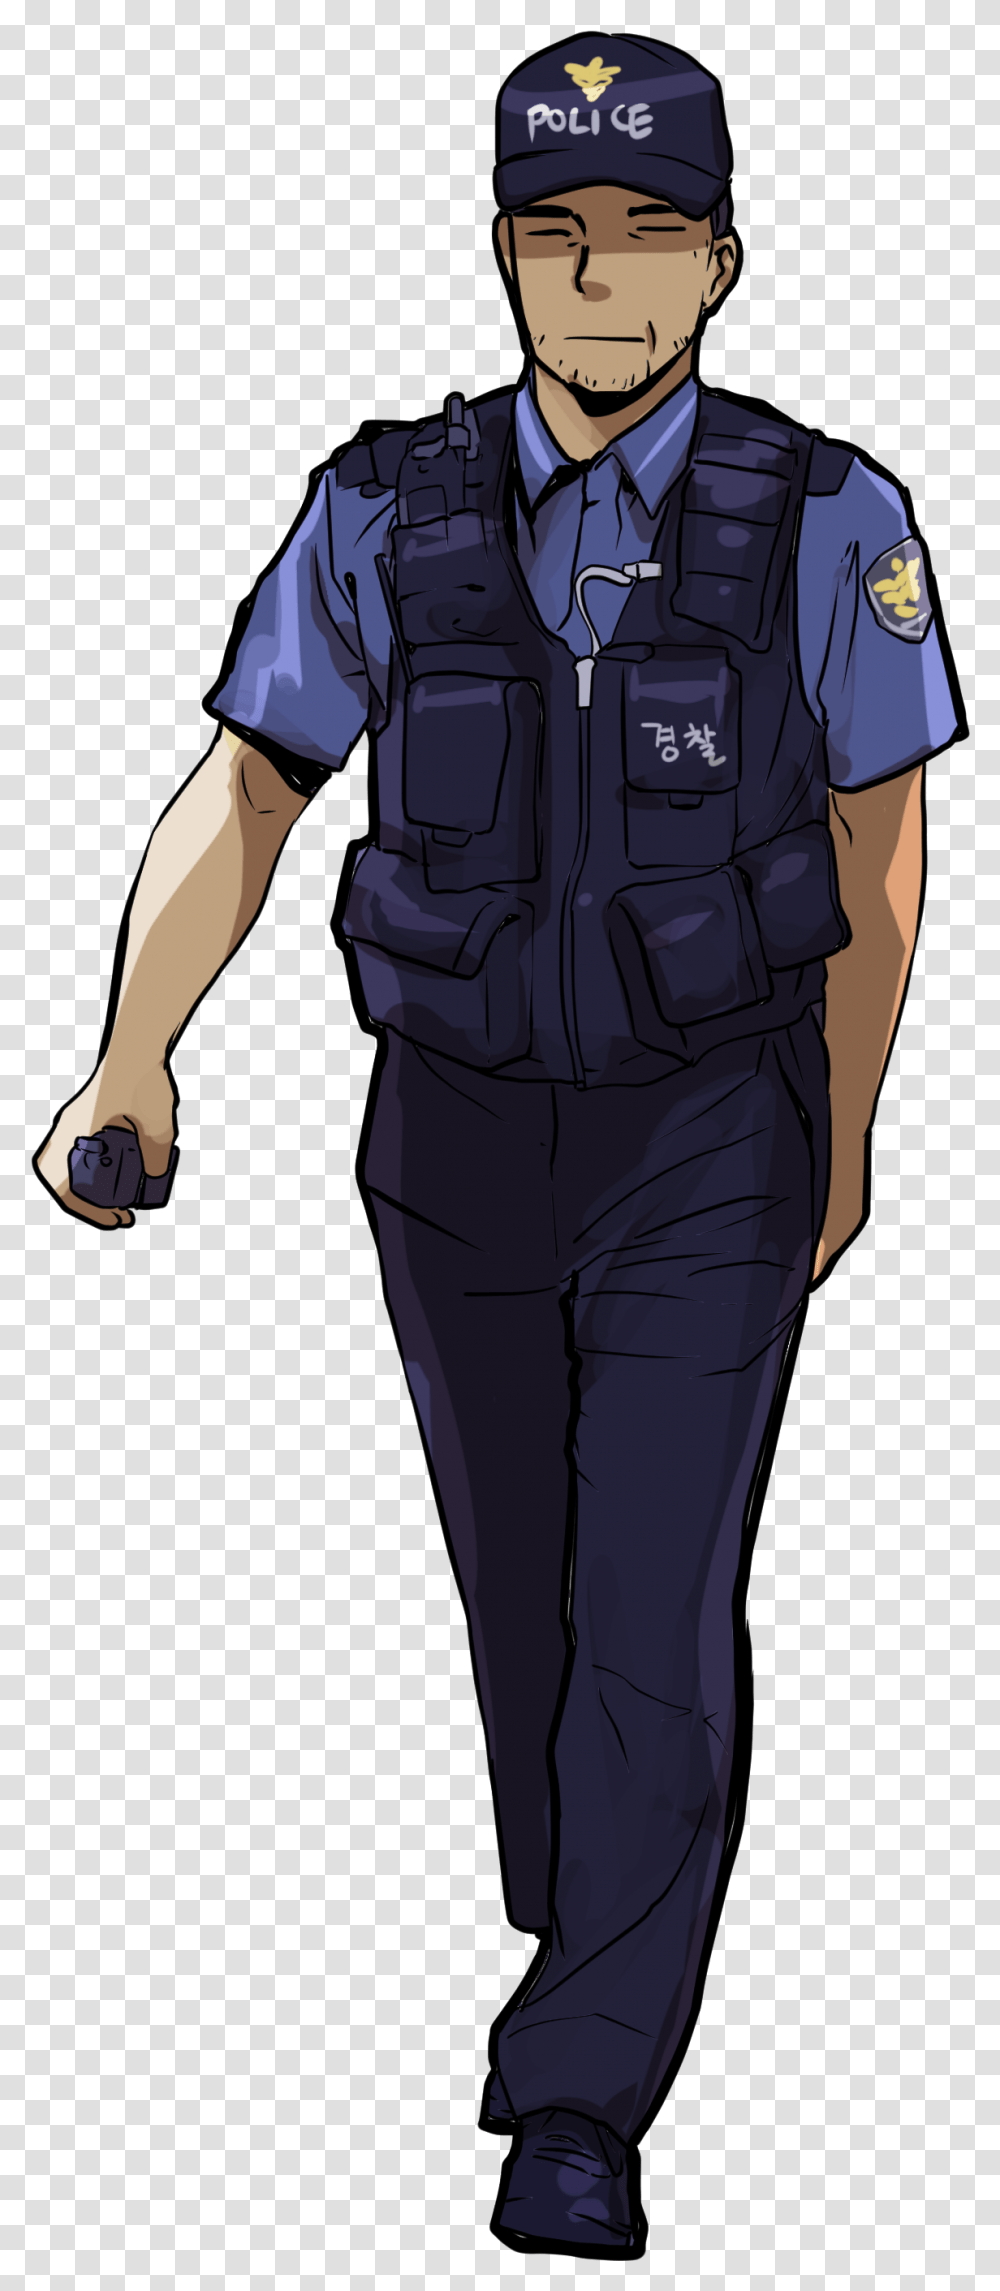 Police Officer Military Uniform Security Male Police Officer, Person, People, Helmet Transparent Png